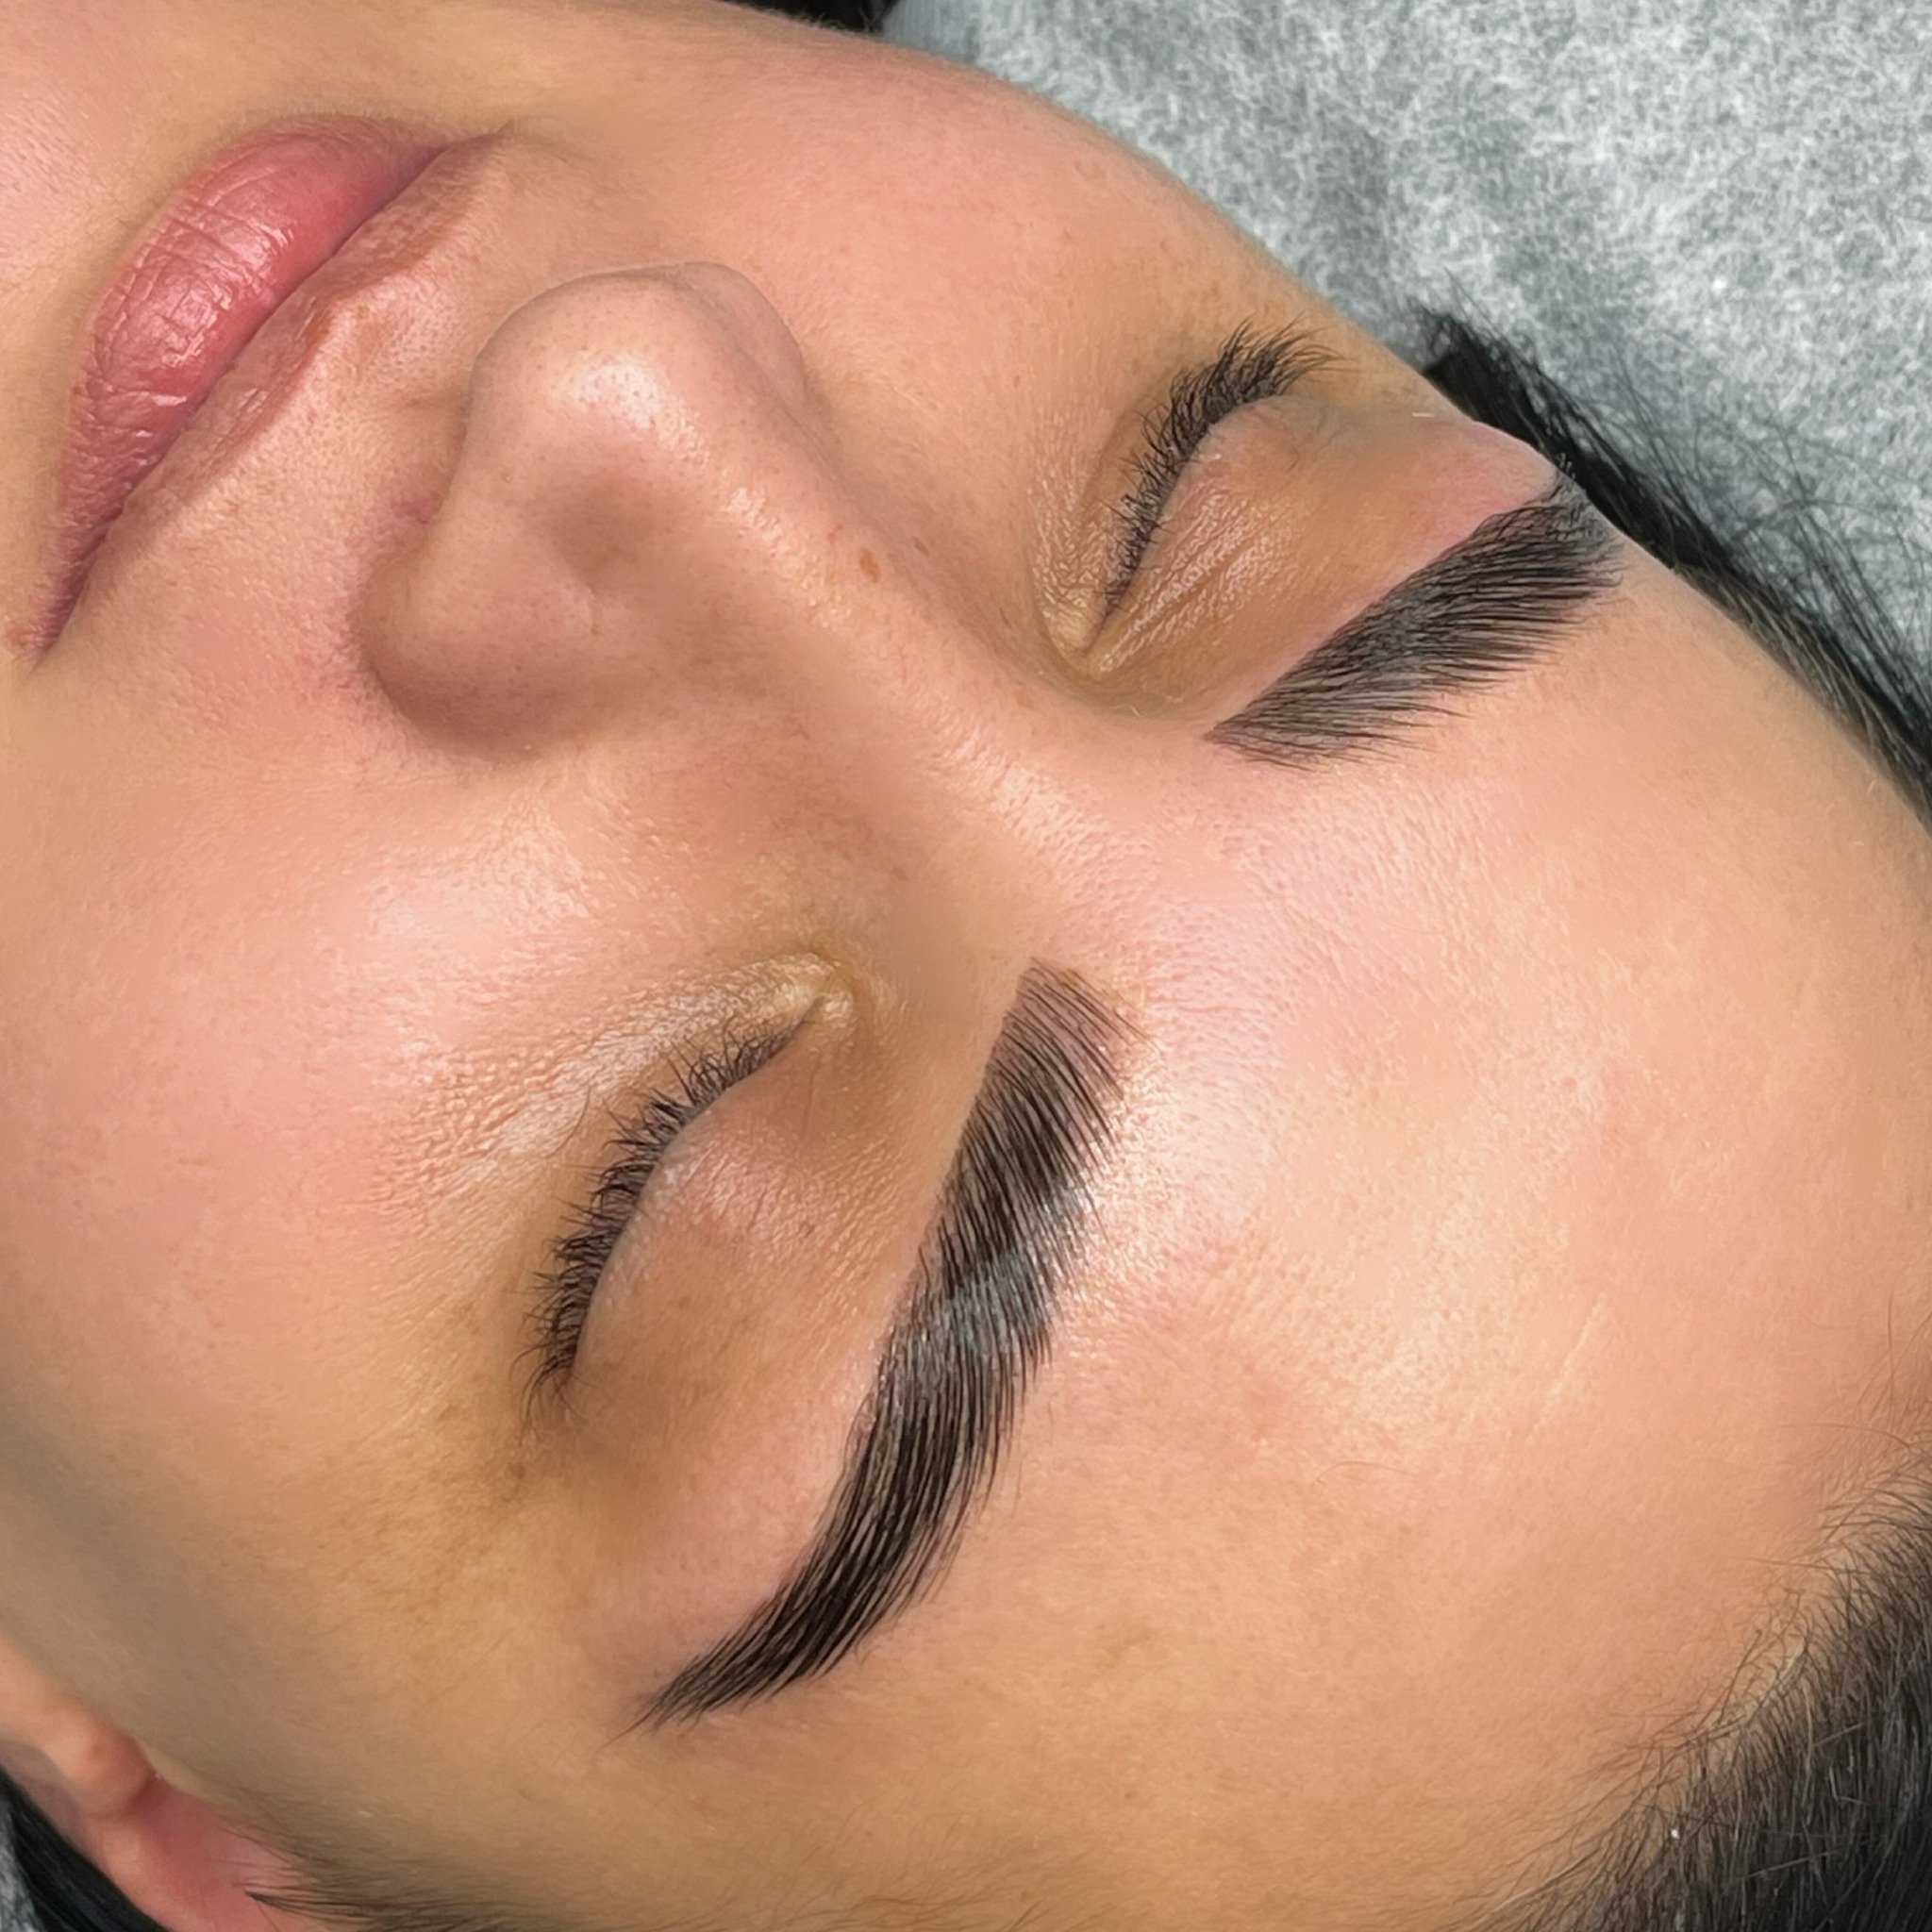 Drooling over here 🤤🤤

~ Brow lamination is designed to straighten the brow hair resulting in an instantly full, lifted and fluffy brow. 
This treatment last between 6-8 weeks. 

~ At the 4 week mark we recommend booking in for brow maintenance app